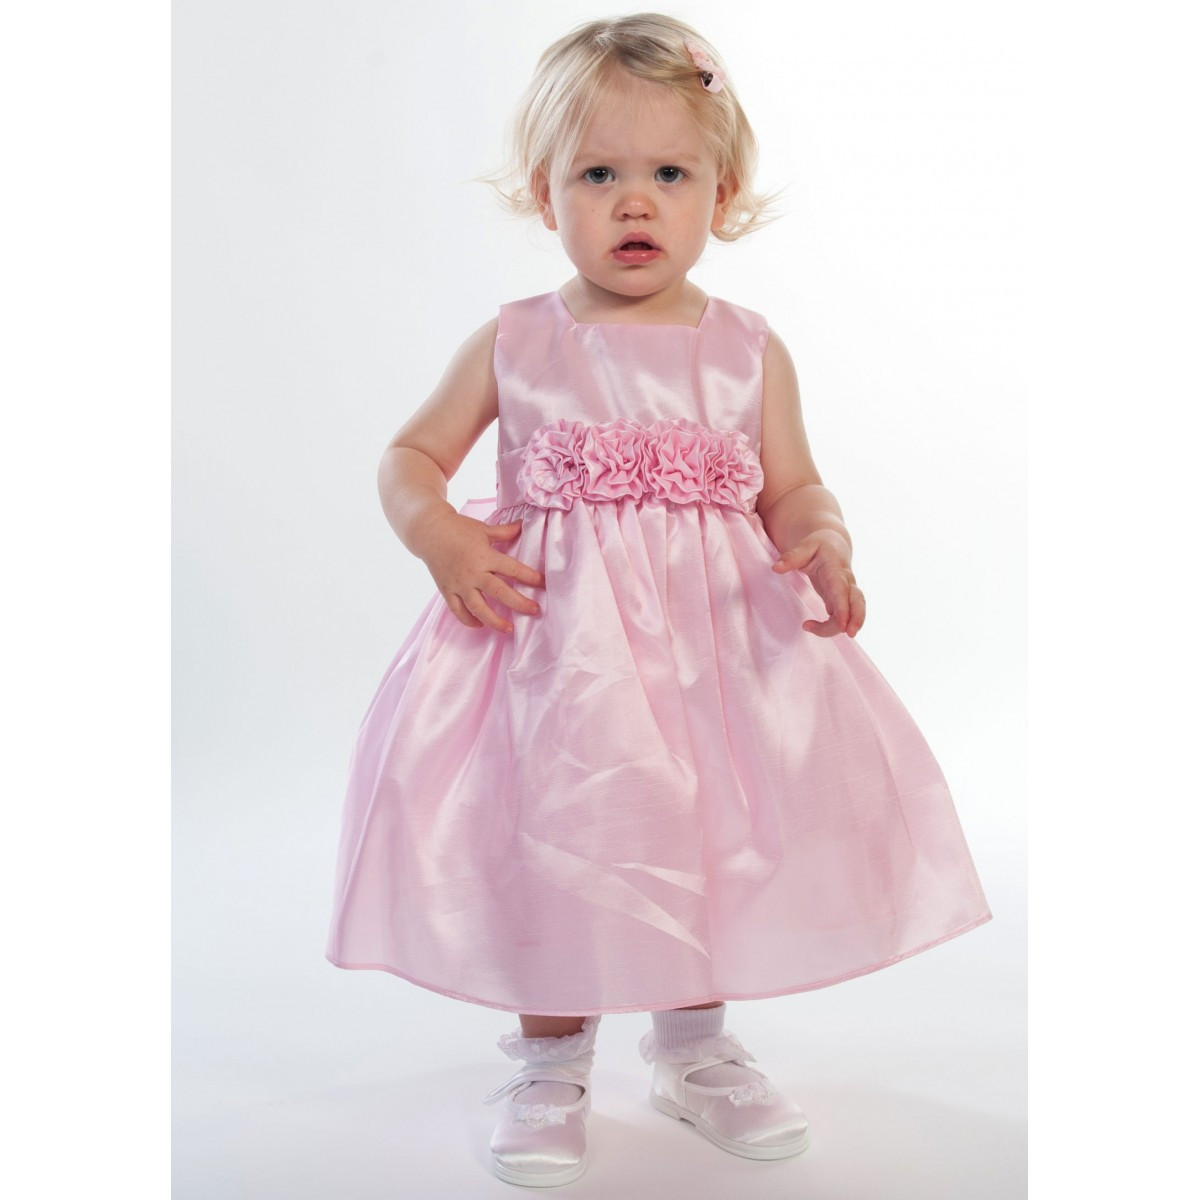 Baby Party Dresses
 Pink taffeta rose waist baby party dress 3 24 months